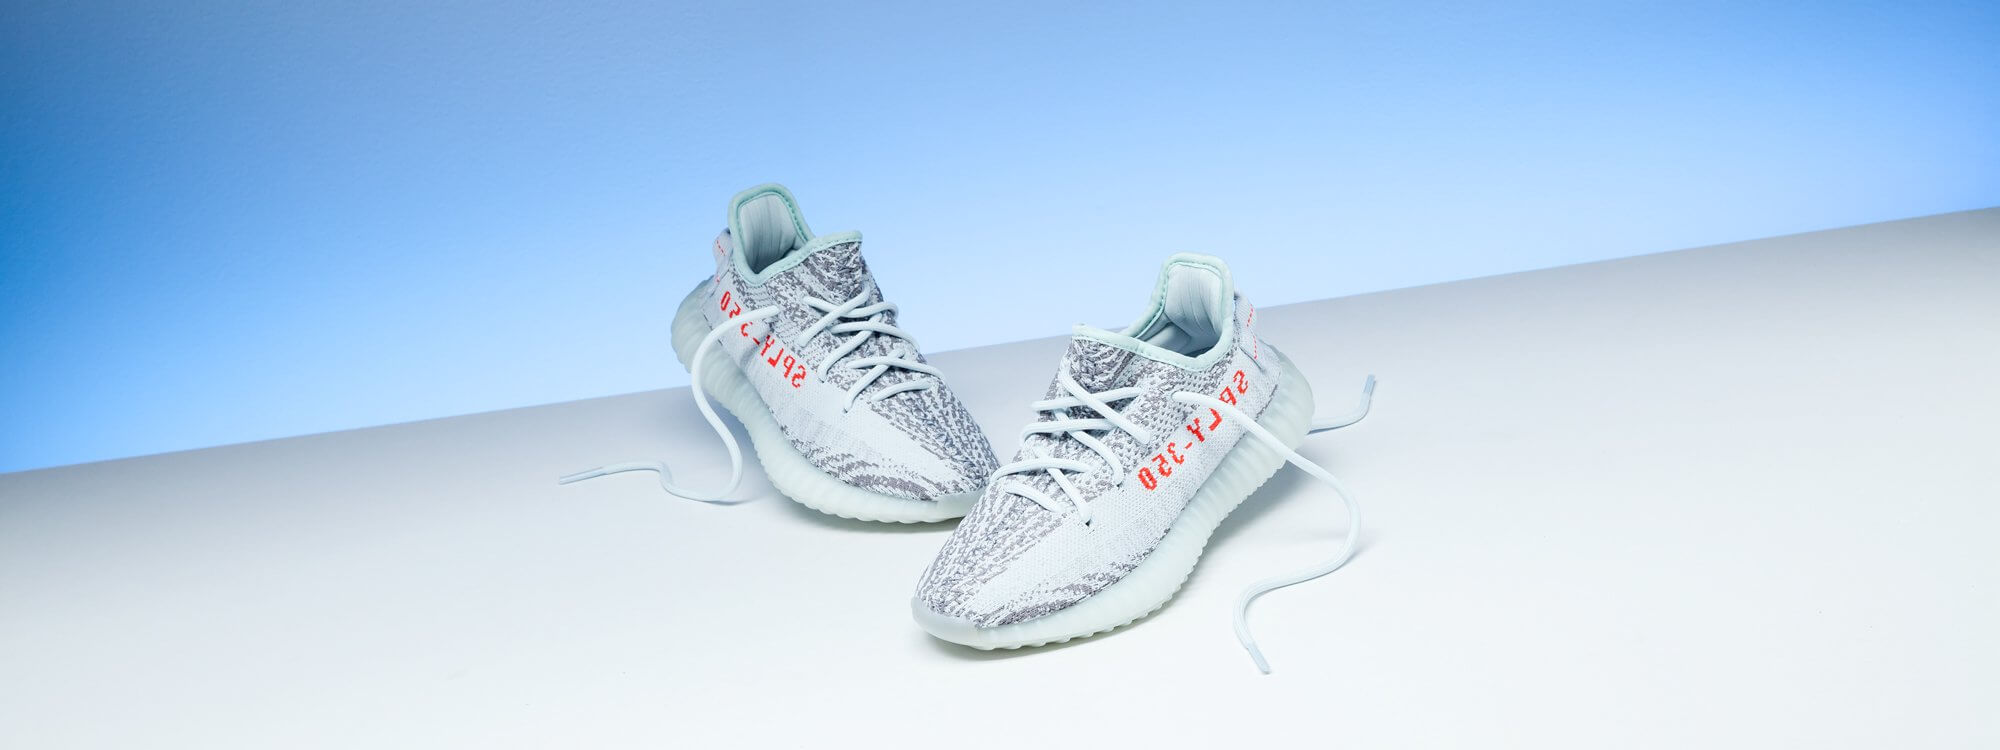 real cheap  Yeezy Boost 350 V2 Blue Tint for sale